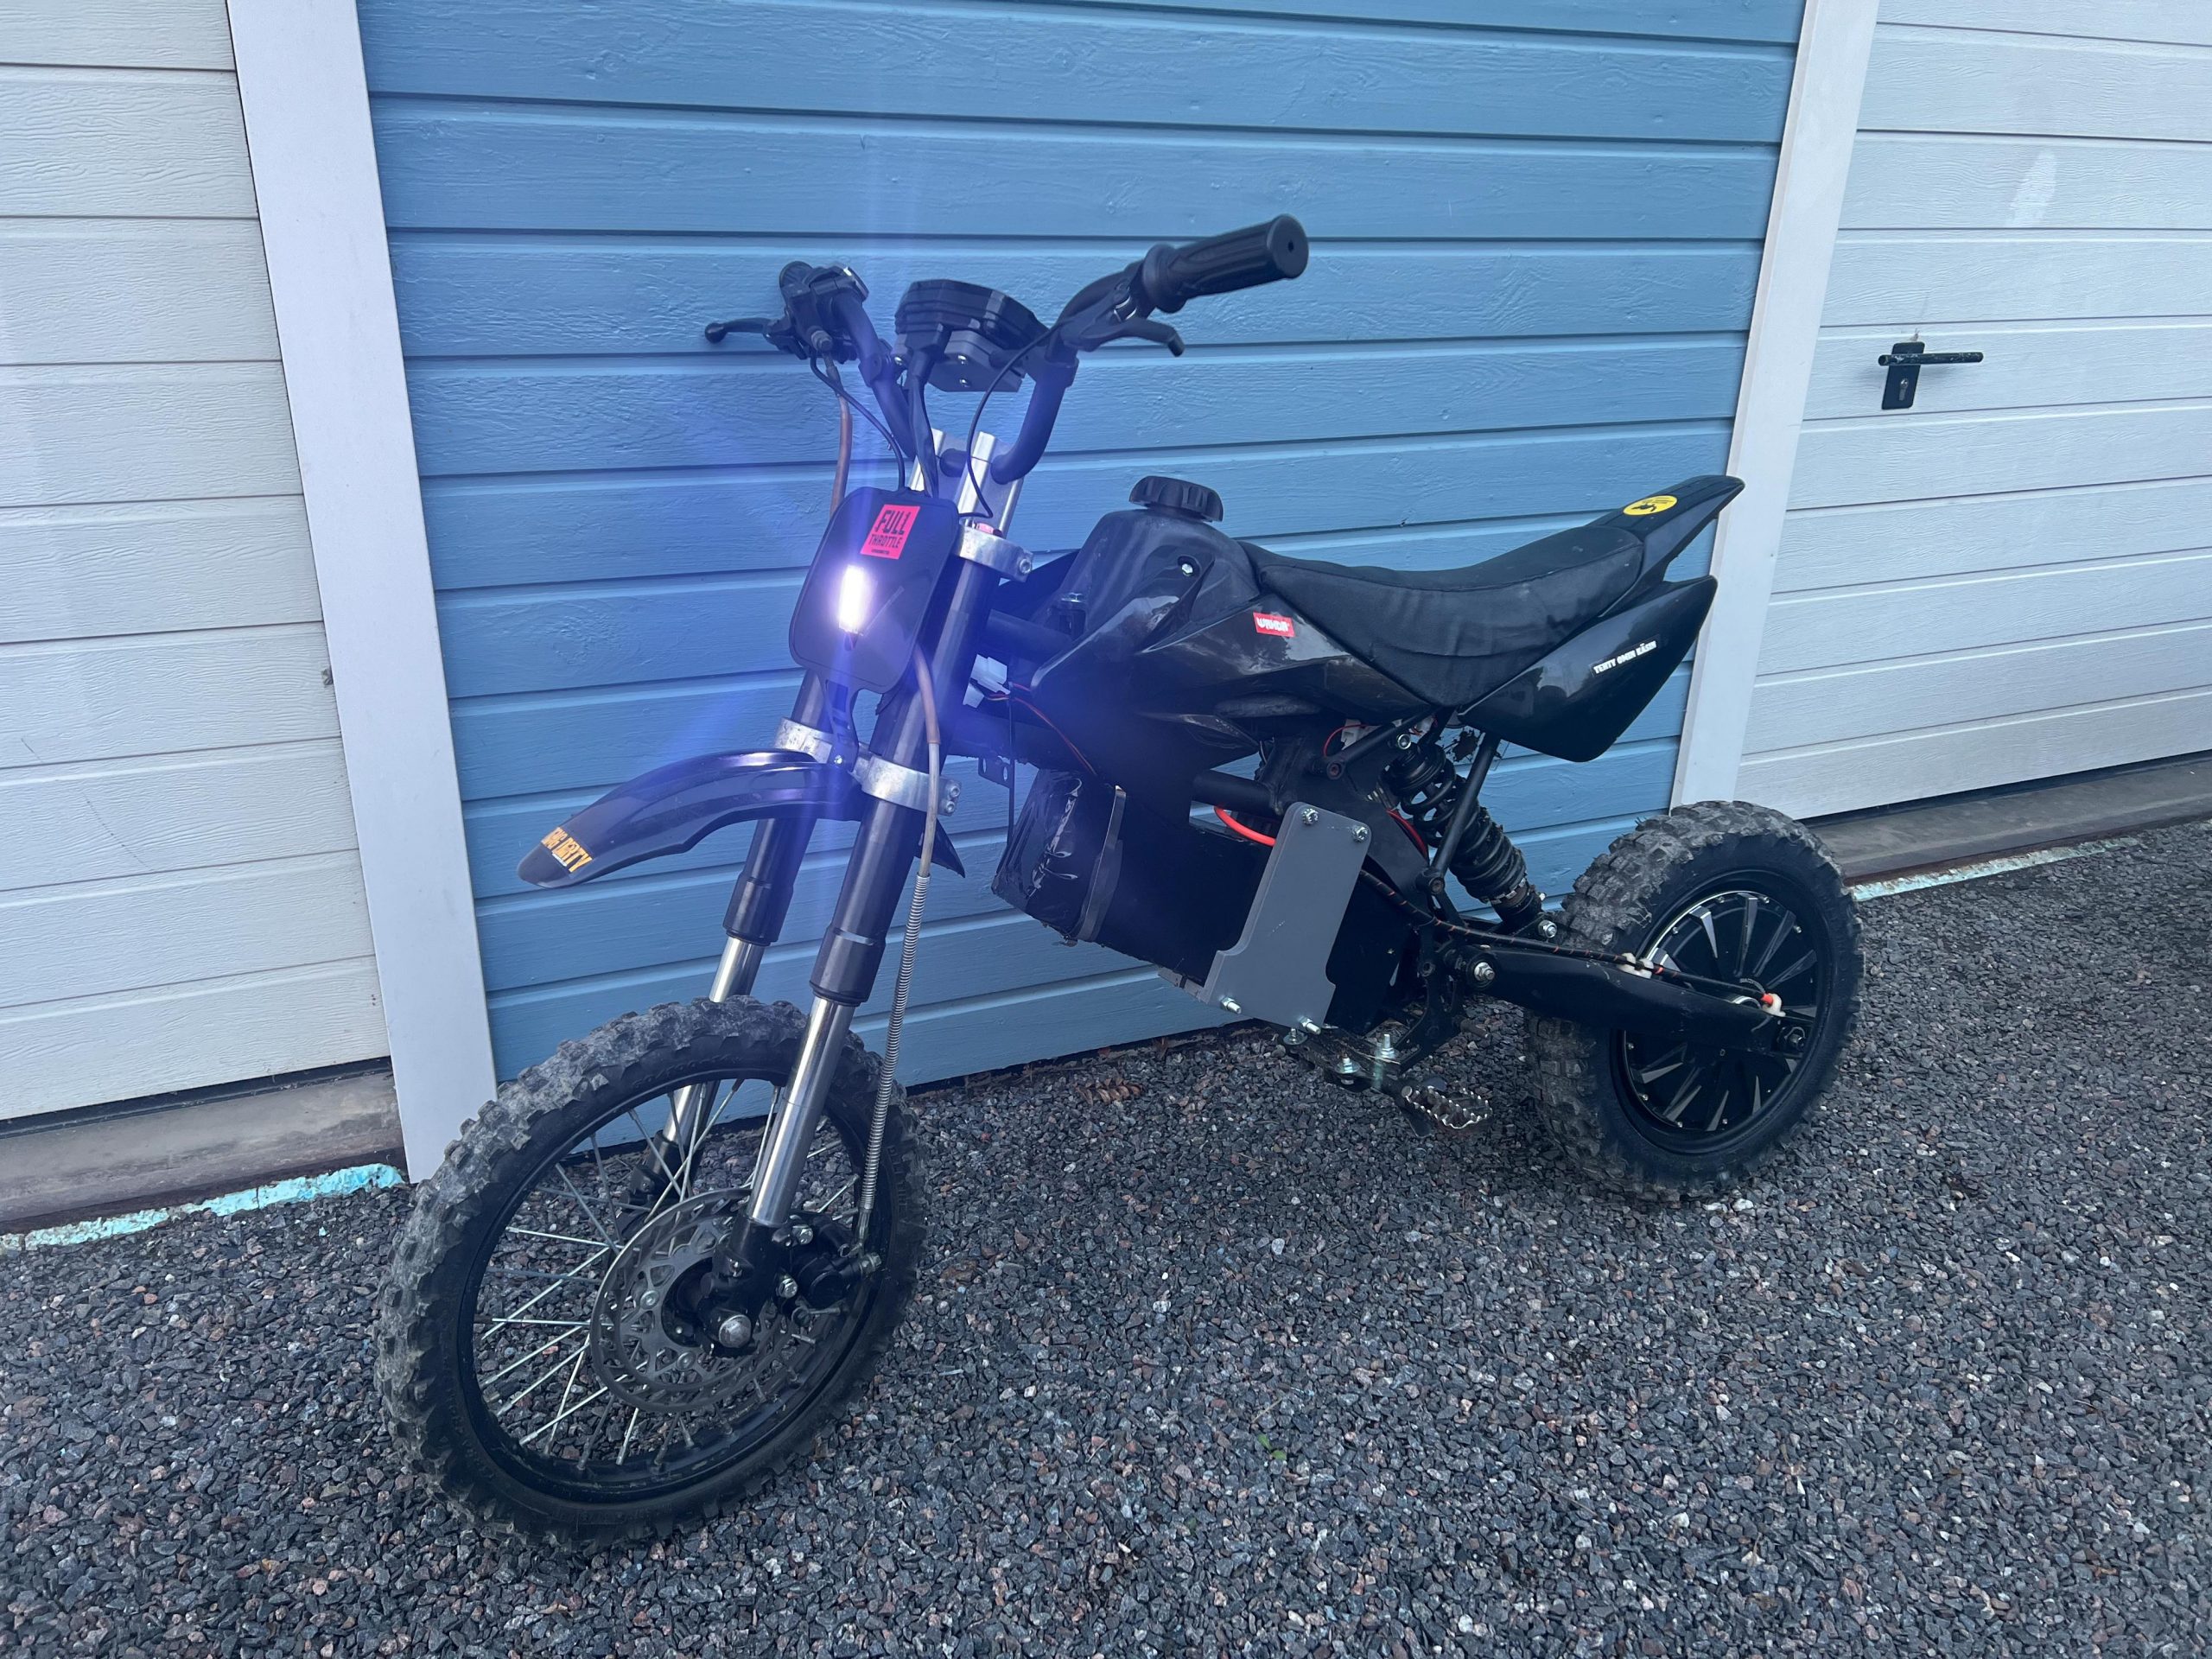 Electric pit bike with headlights on